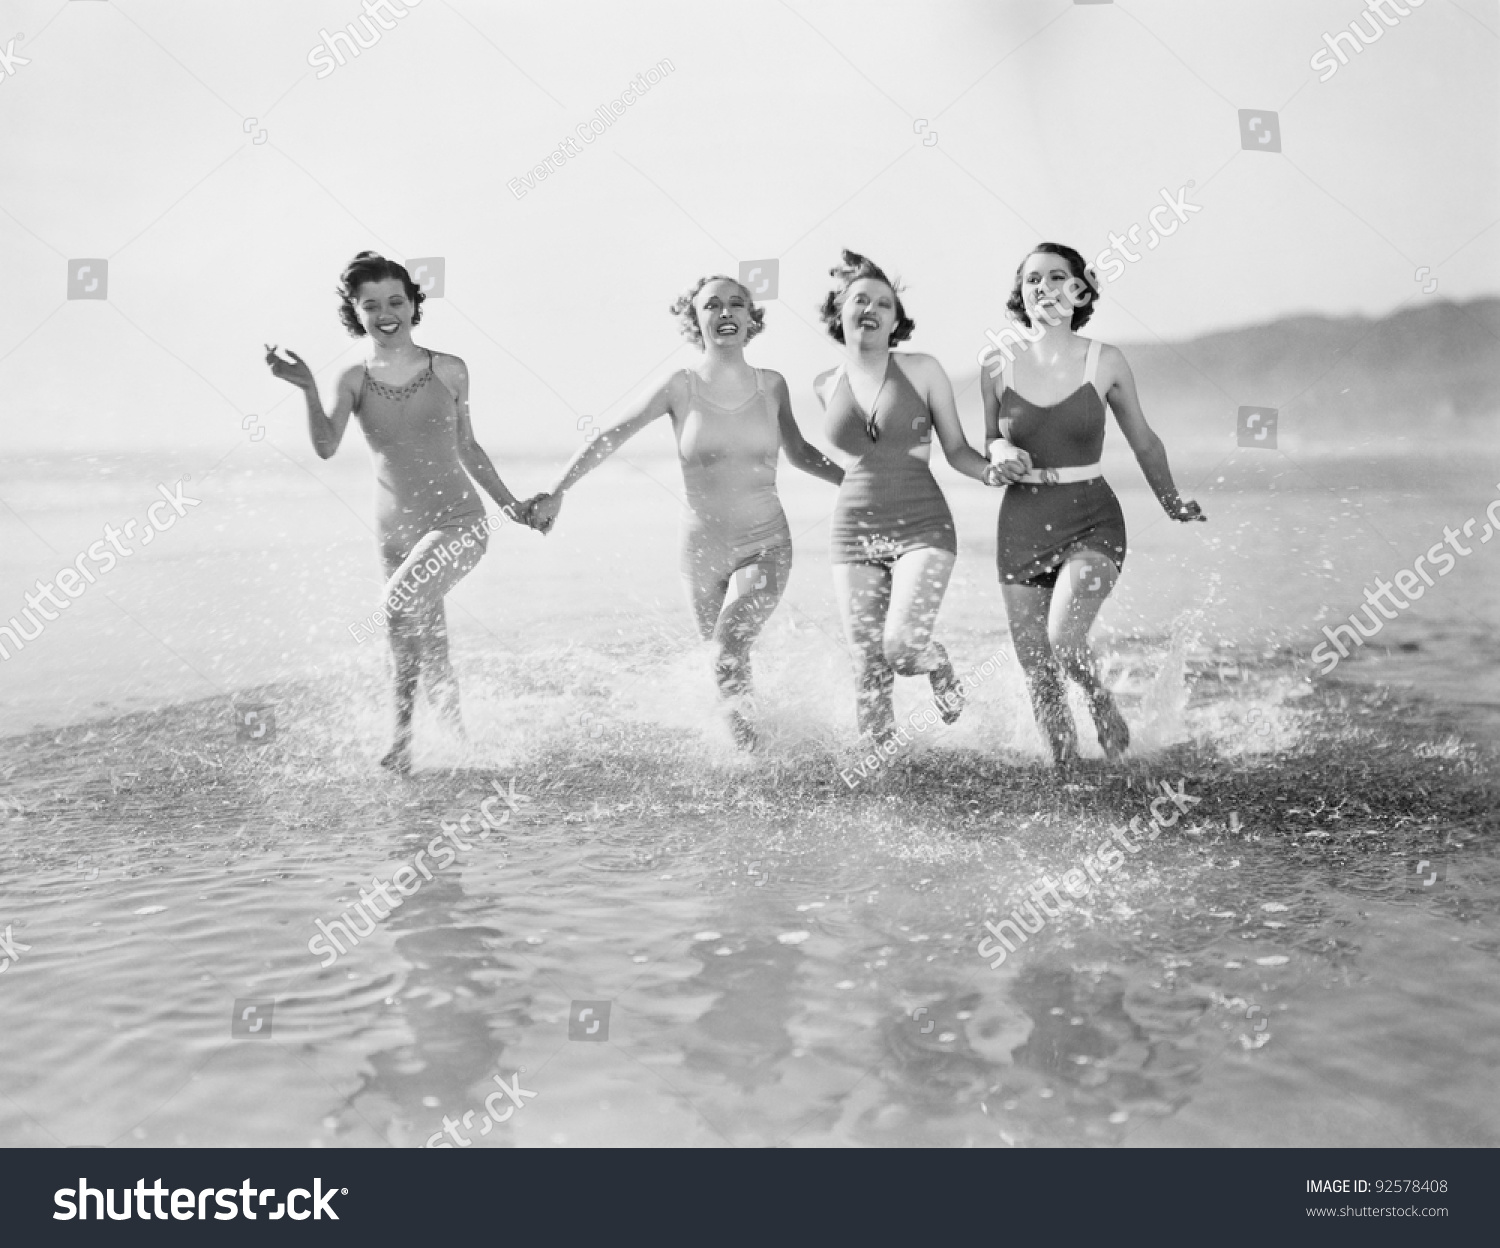 Four women running in water on the beach #92578408